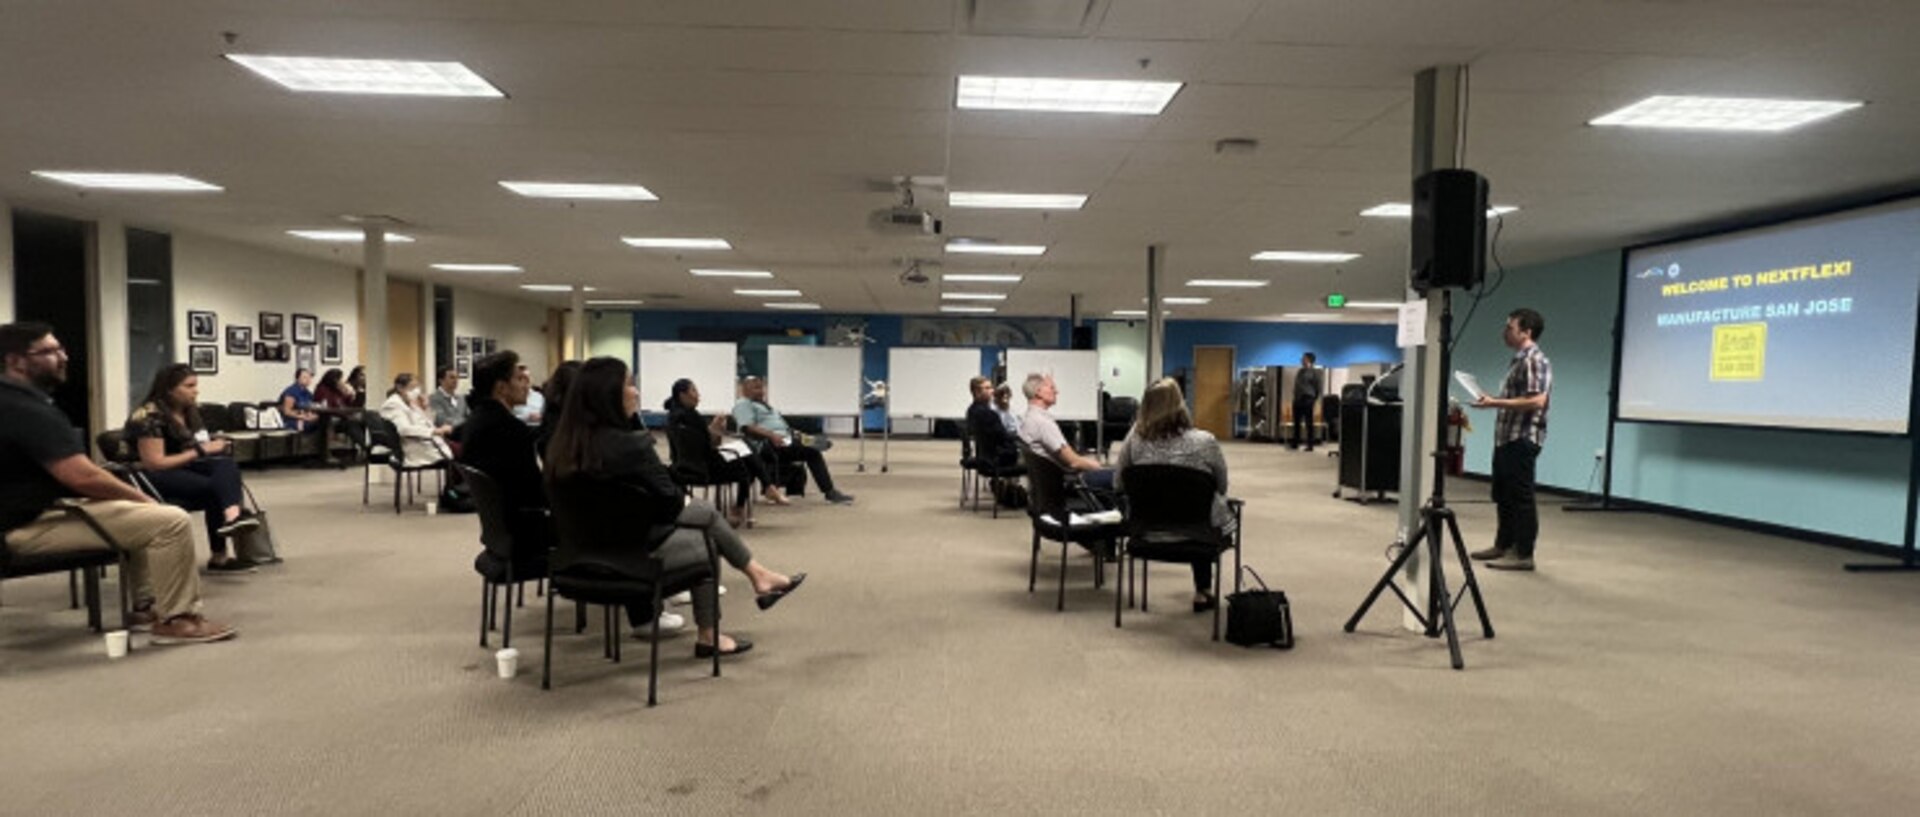 On June 20th, NextFlex hosted a group of North San Jose manufacturers for a networking event and roundtable discussion organized by Manufacture: San Jose. The event was free for manufacturing business owners located in San Jose.